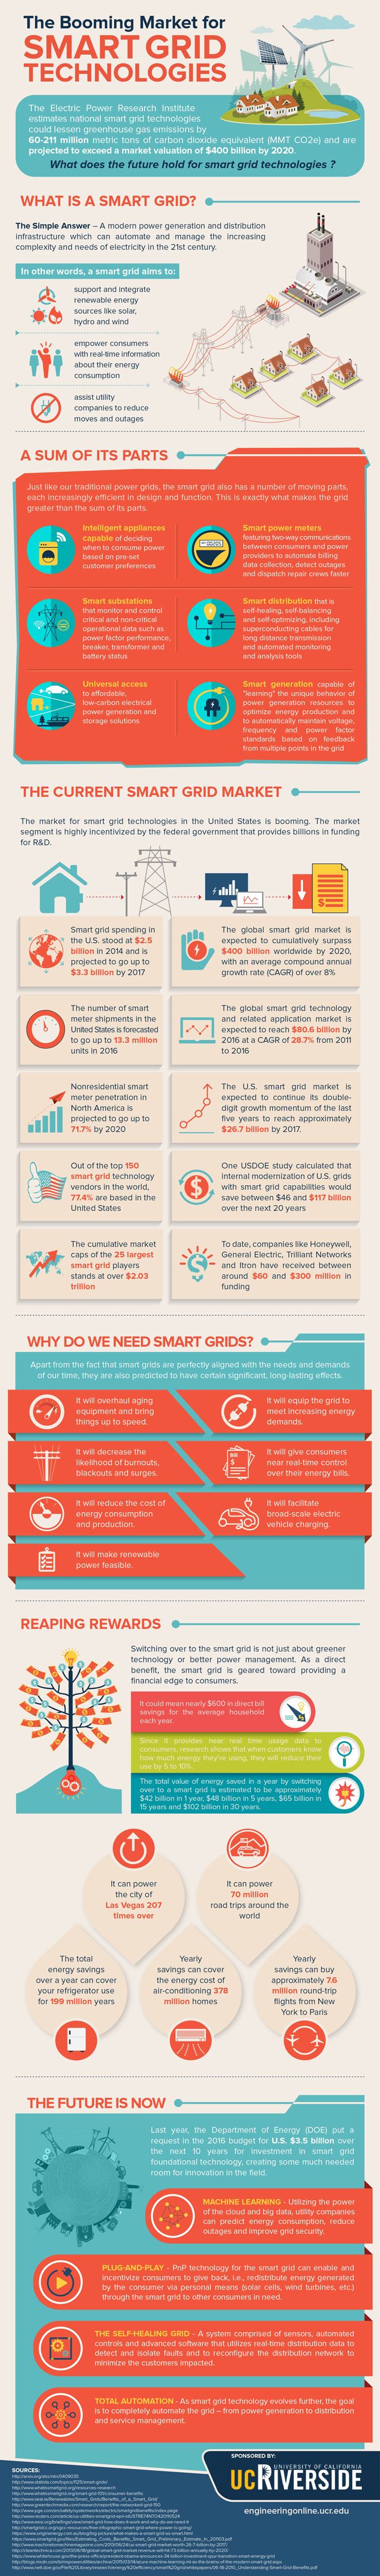 The Popularity Of Smart Grid Technologies - Infographic